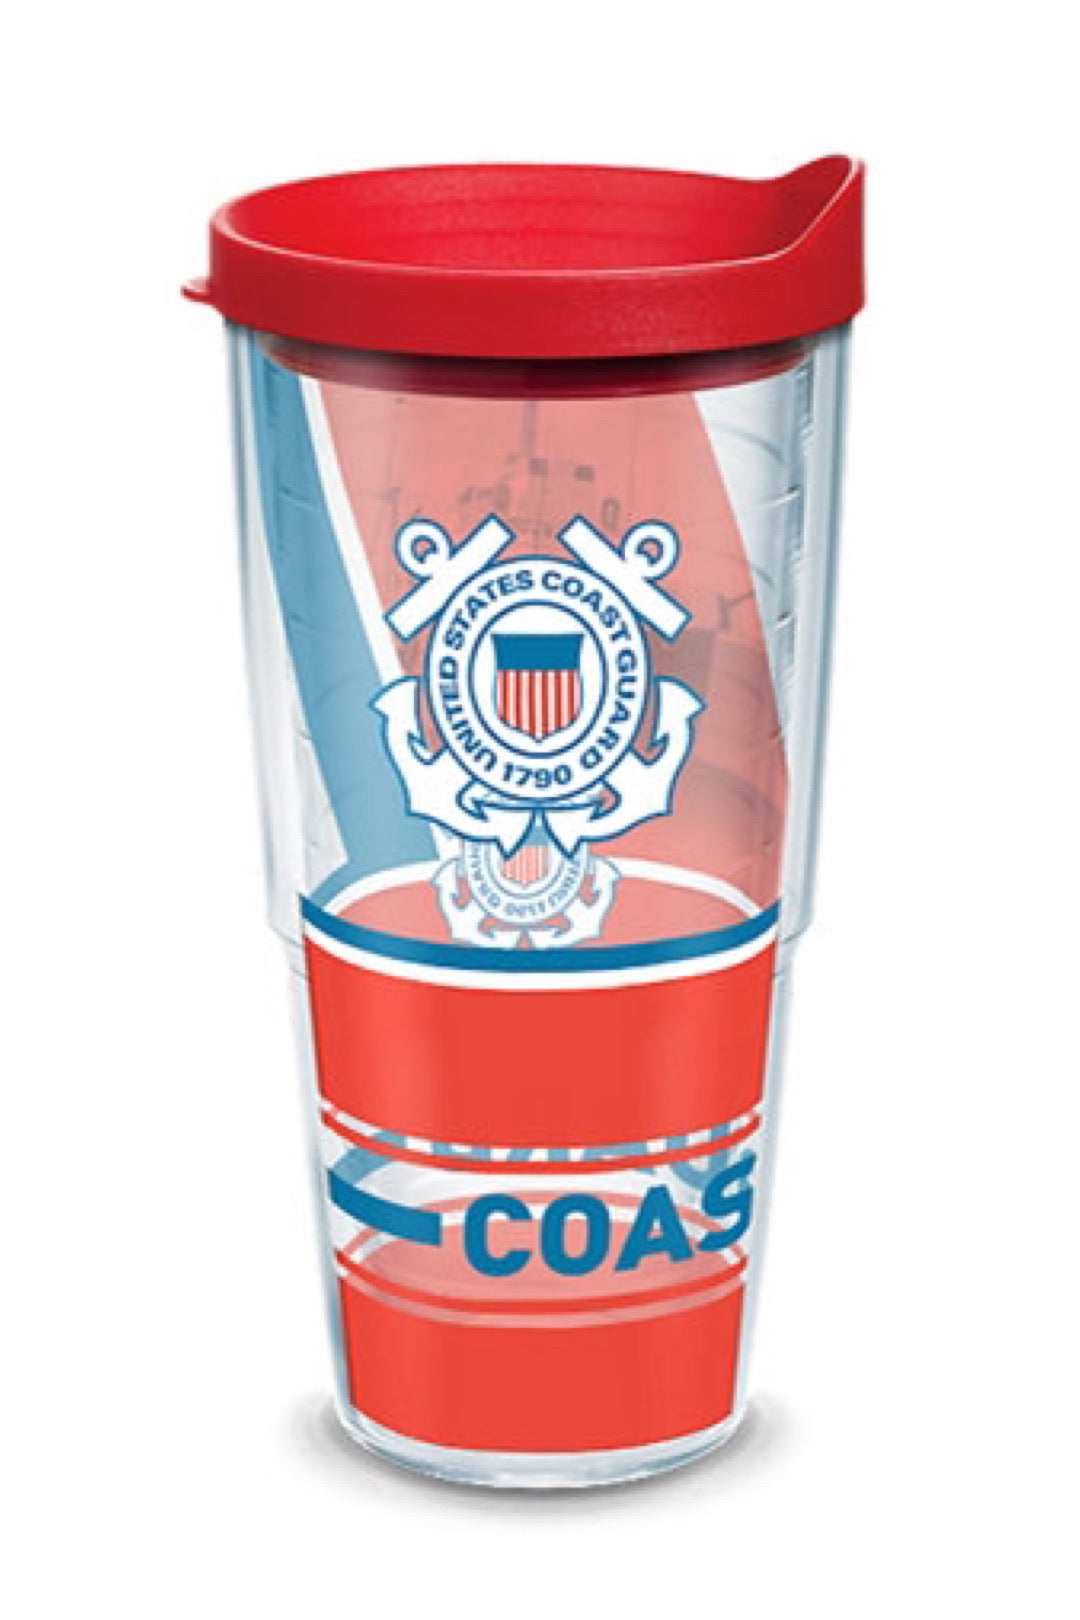 Coast Guard Forever Proud Plastic Tumblers by Tervis